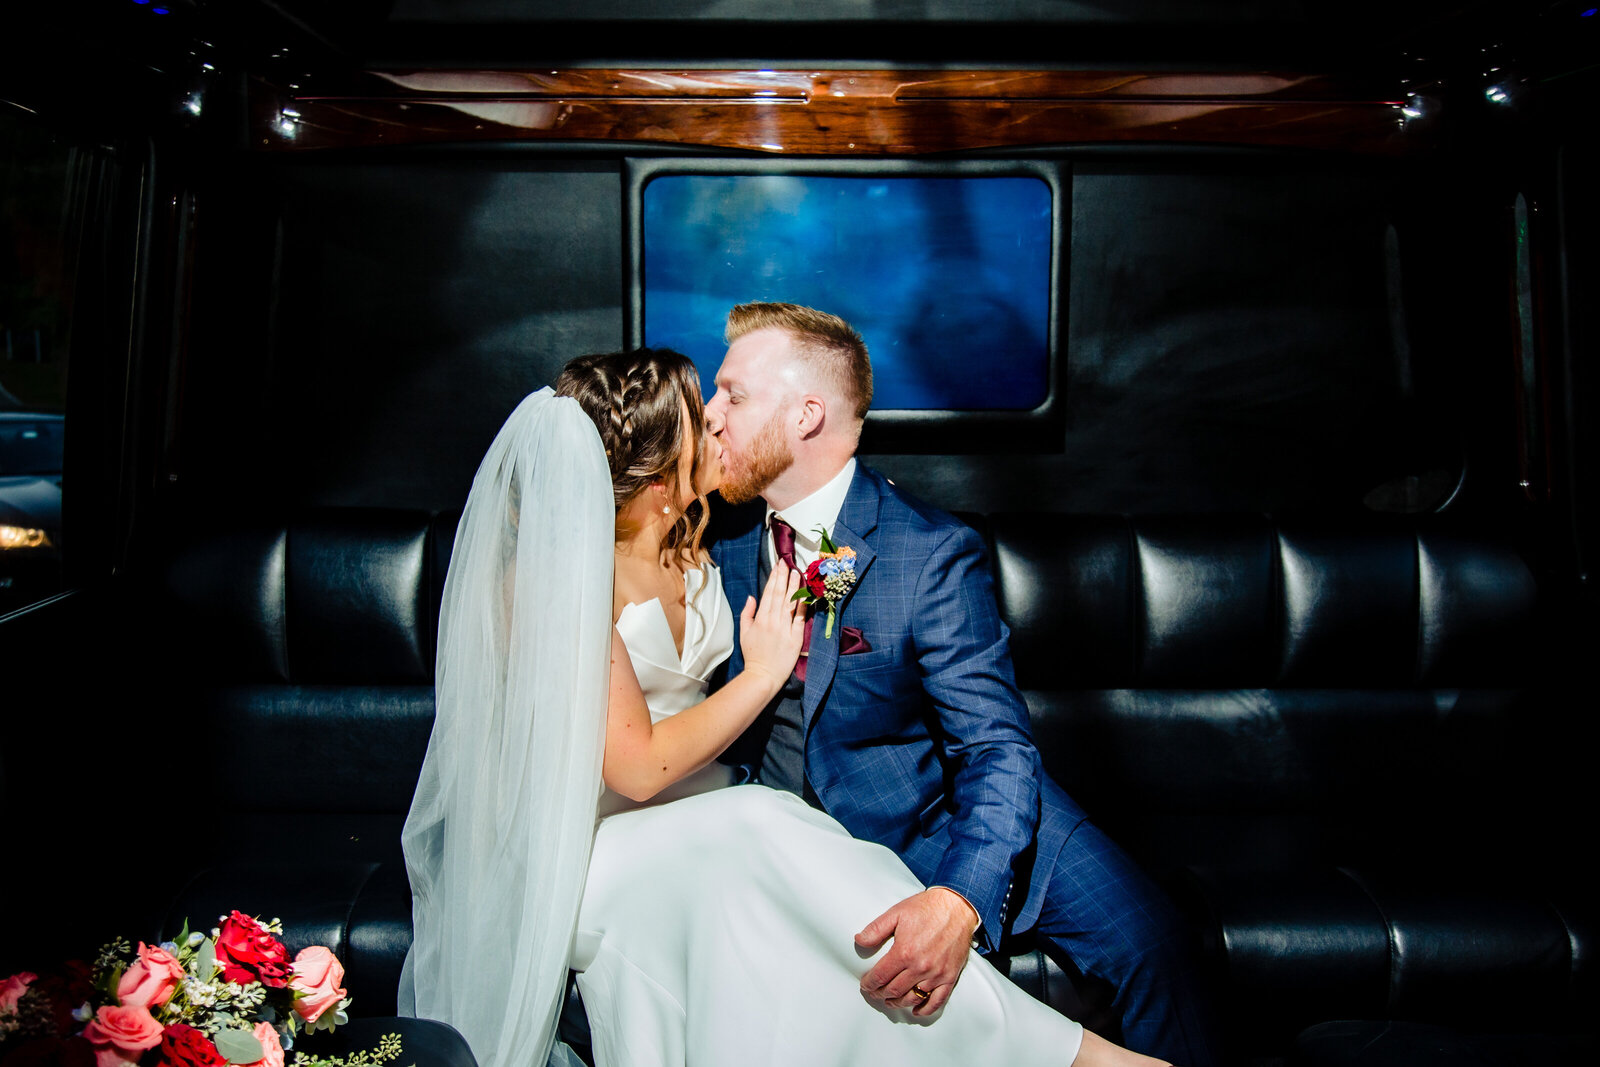 Bride and groom kiss in limousine